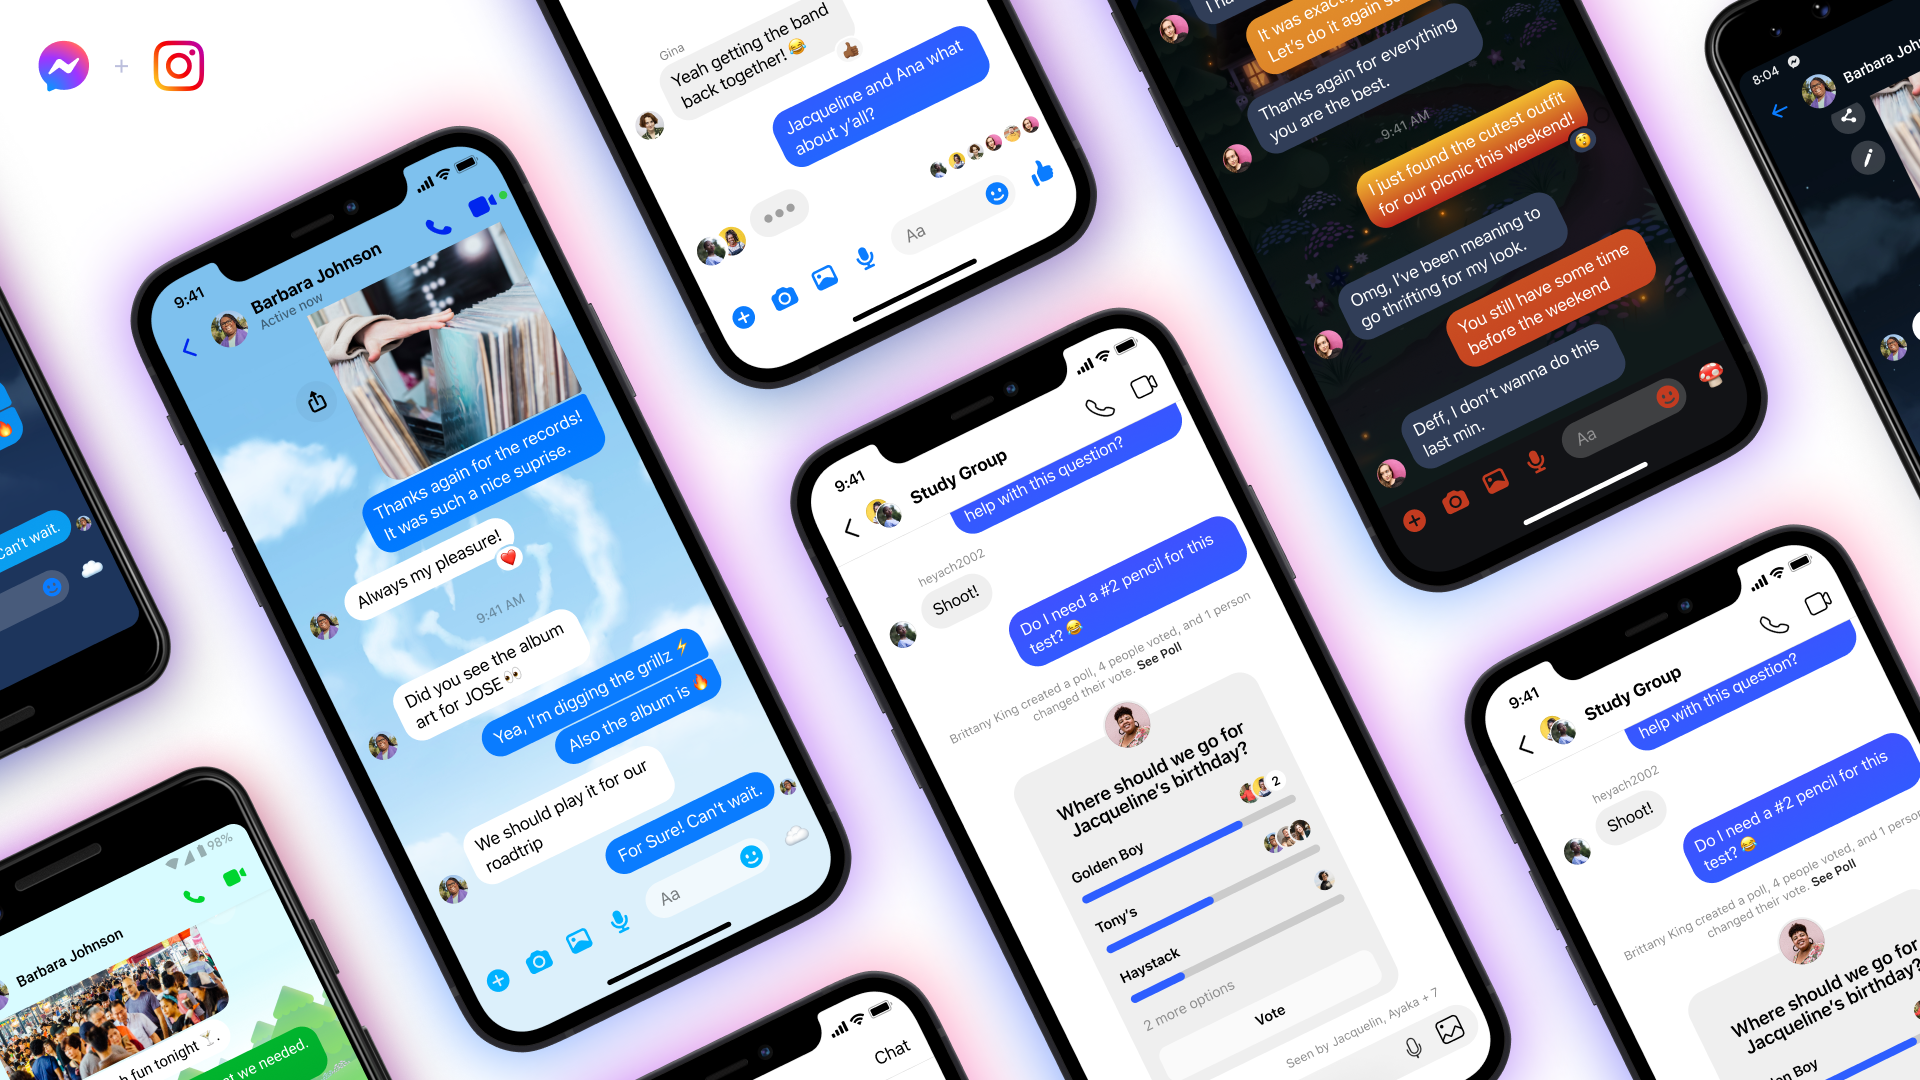 Messenger From Facebook: How to Use the Care Chat Theme